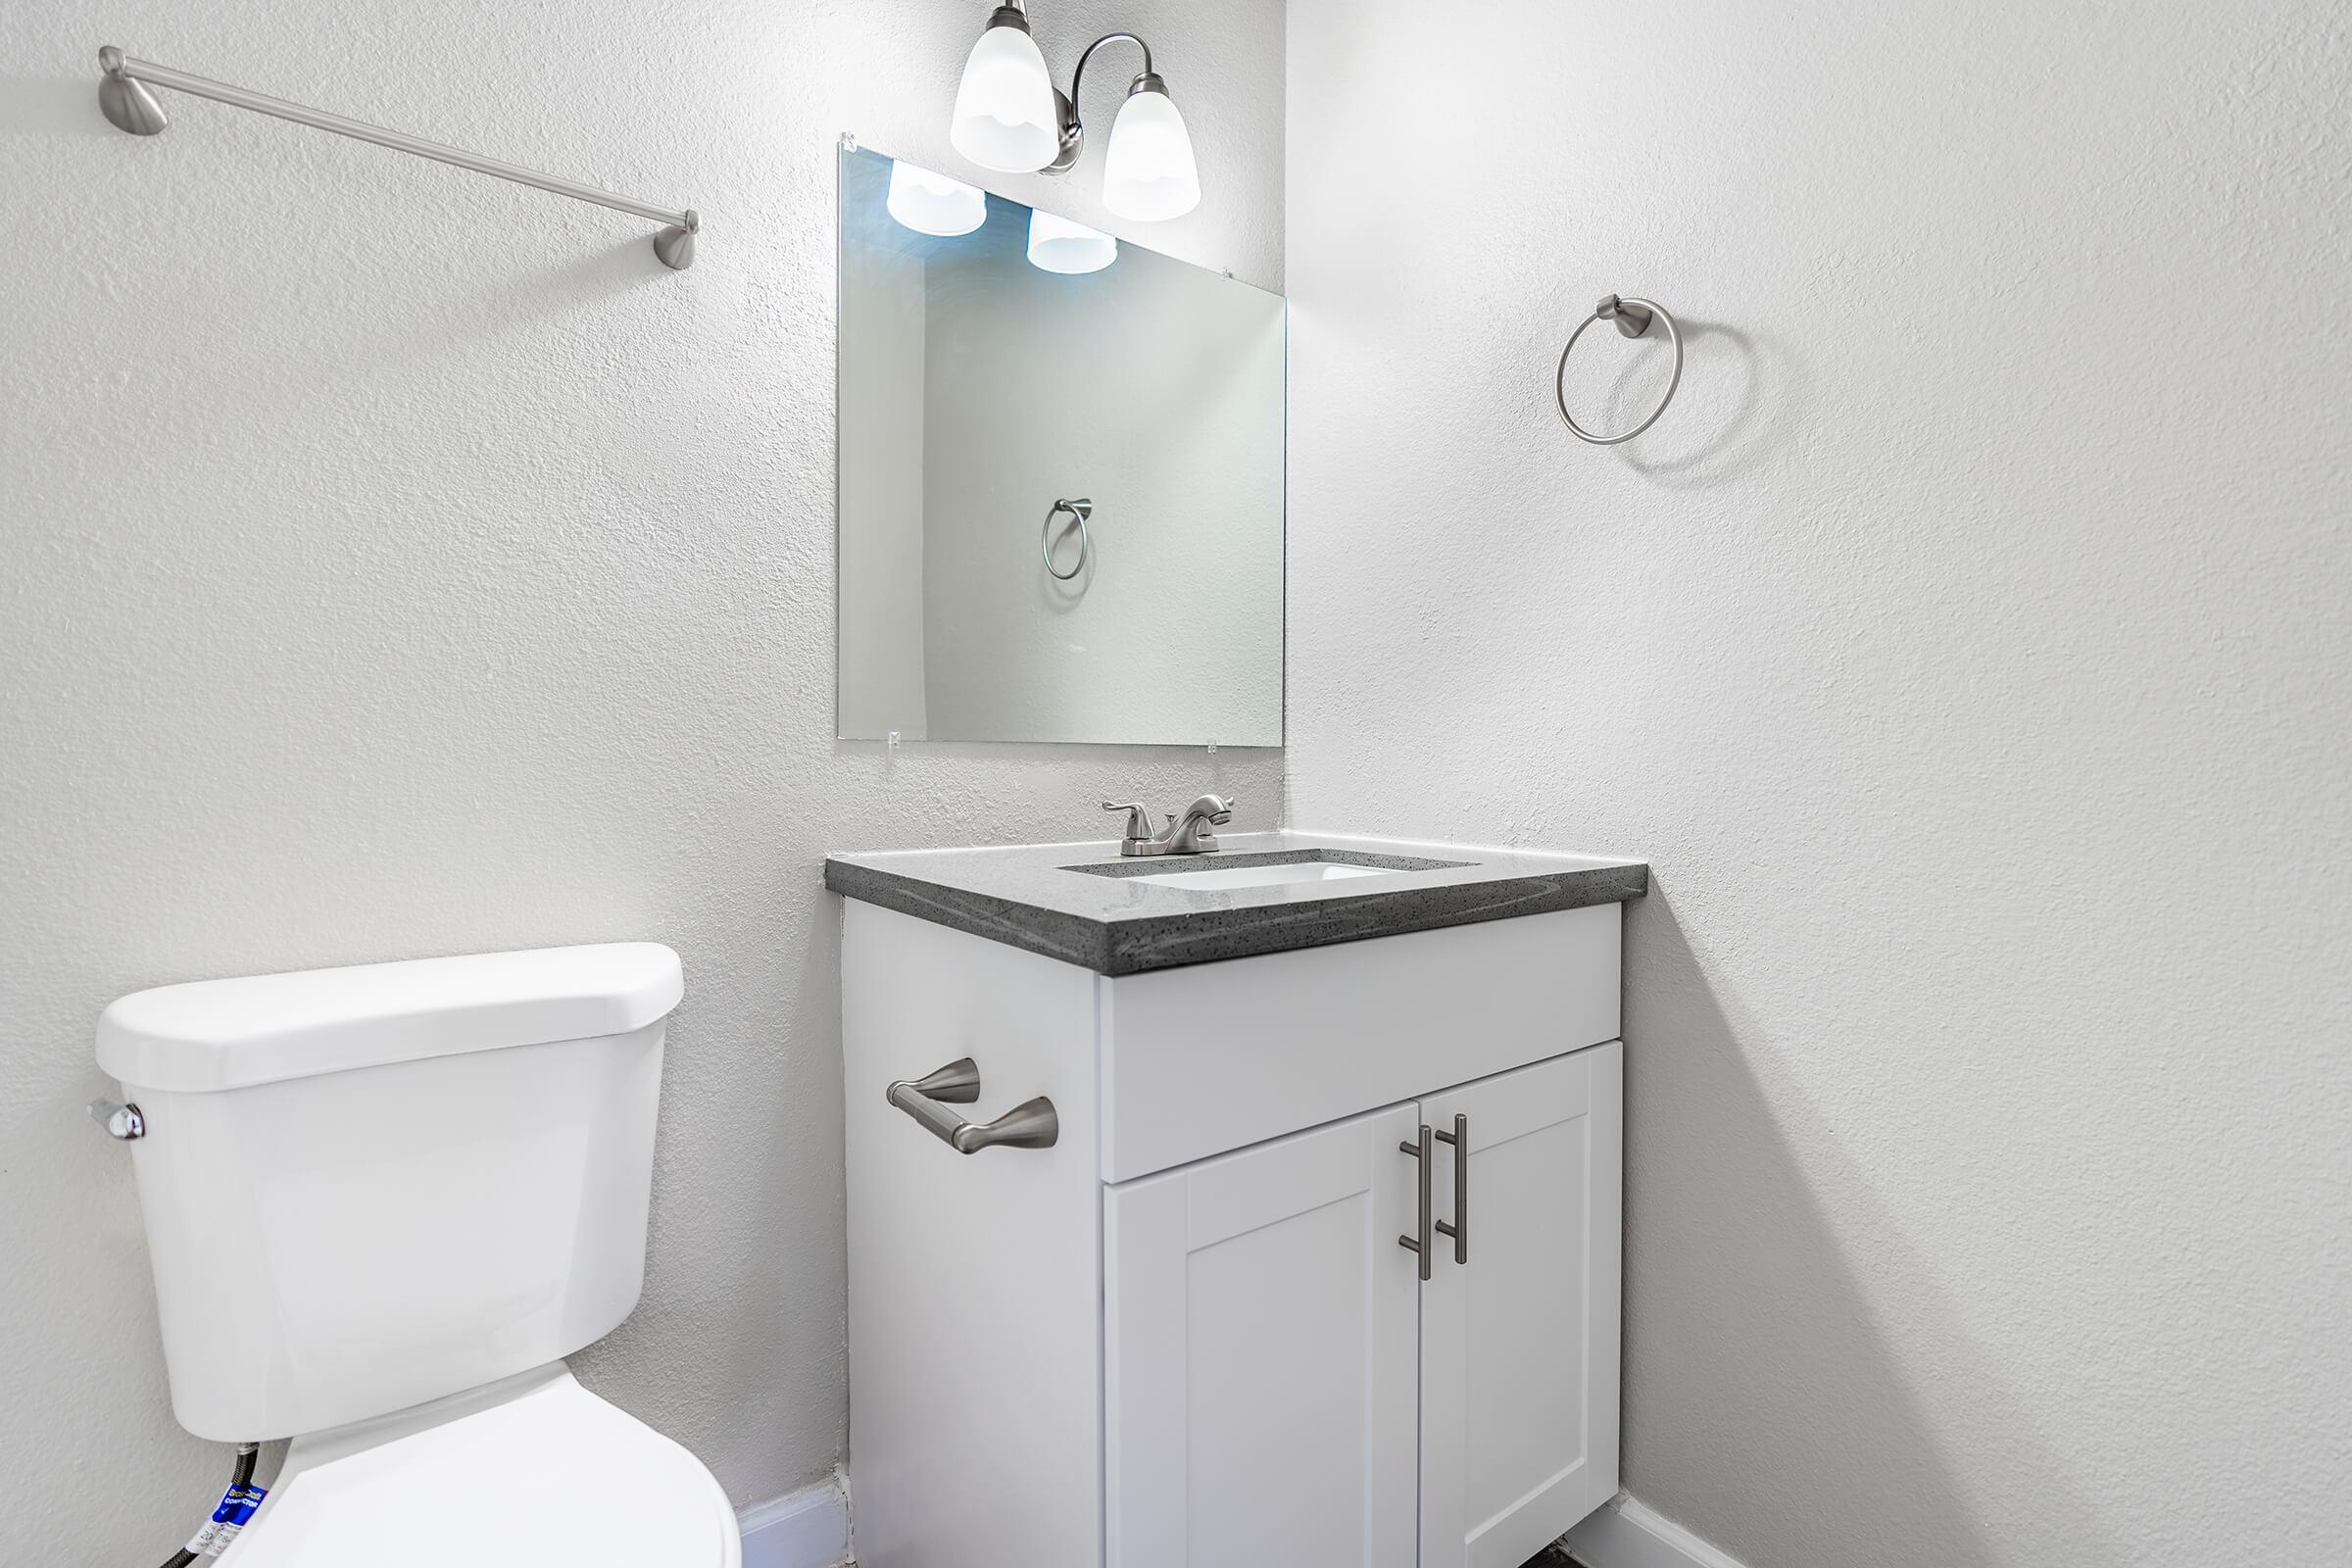 White cabinet vanity with mirror and toilet next to it